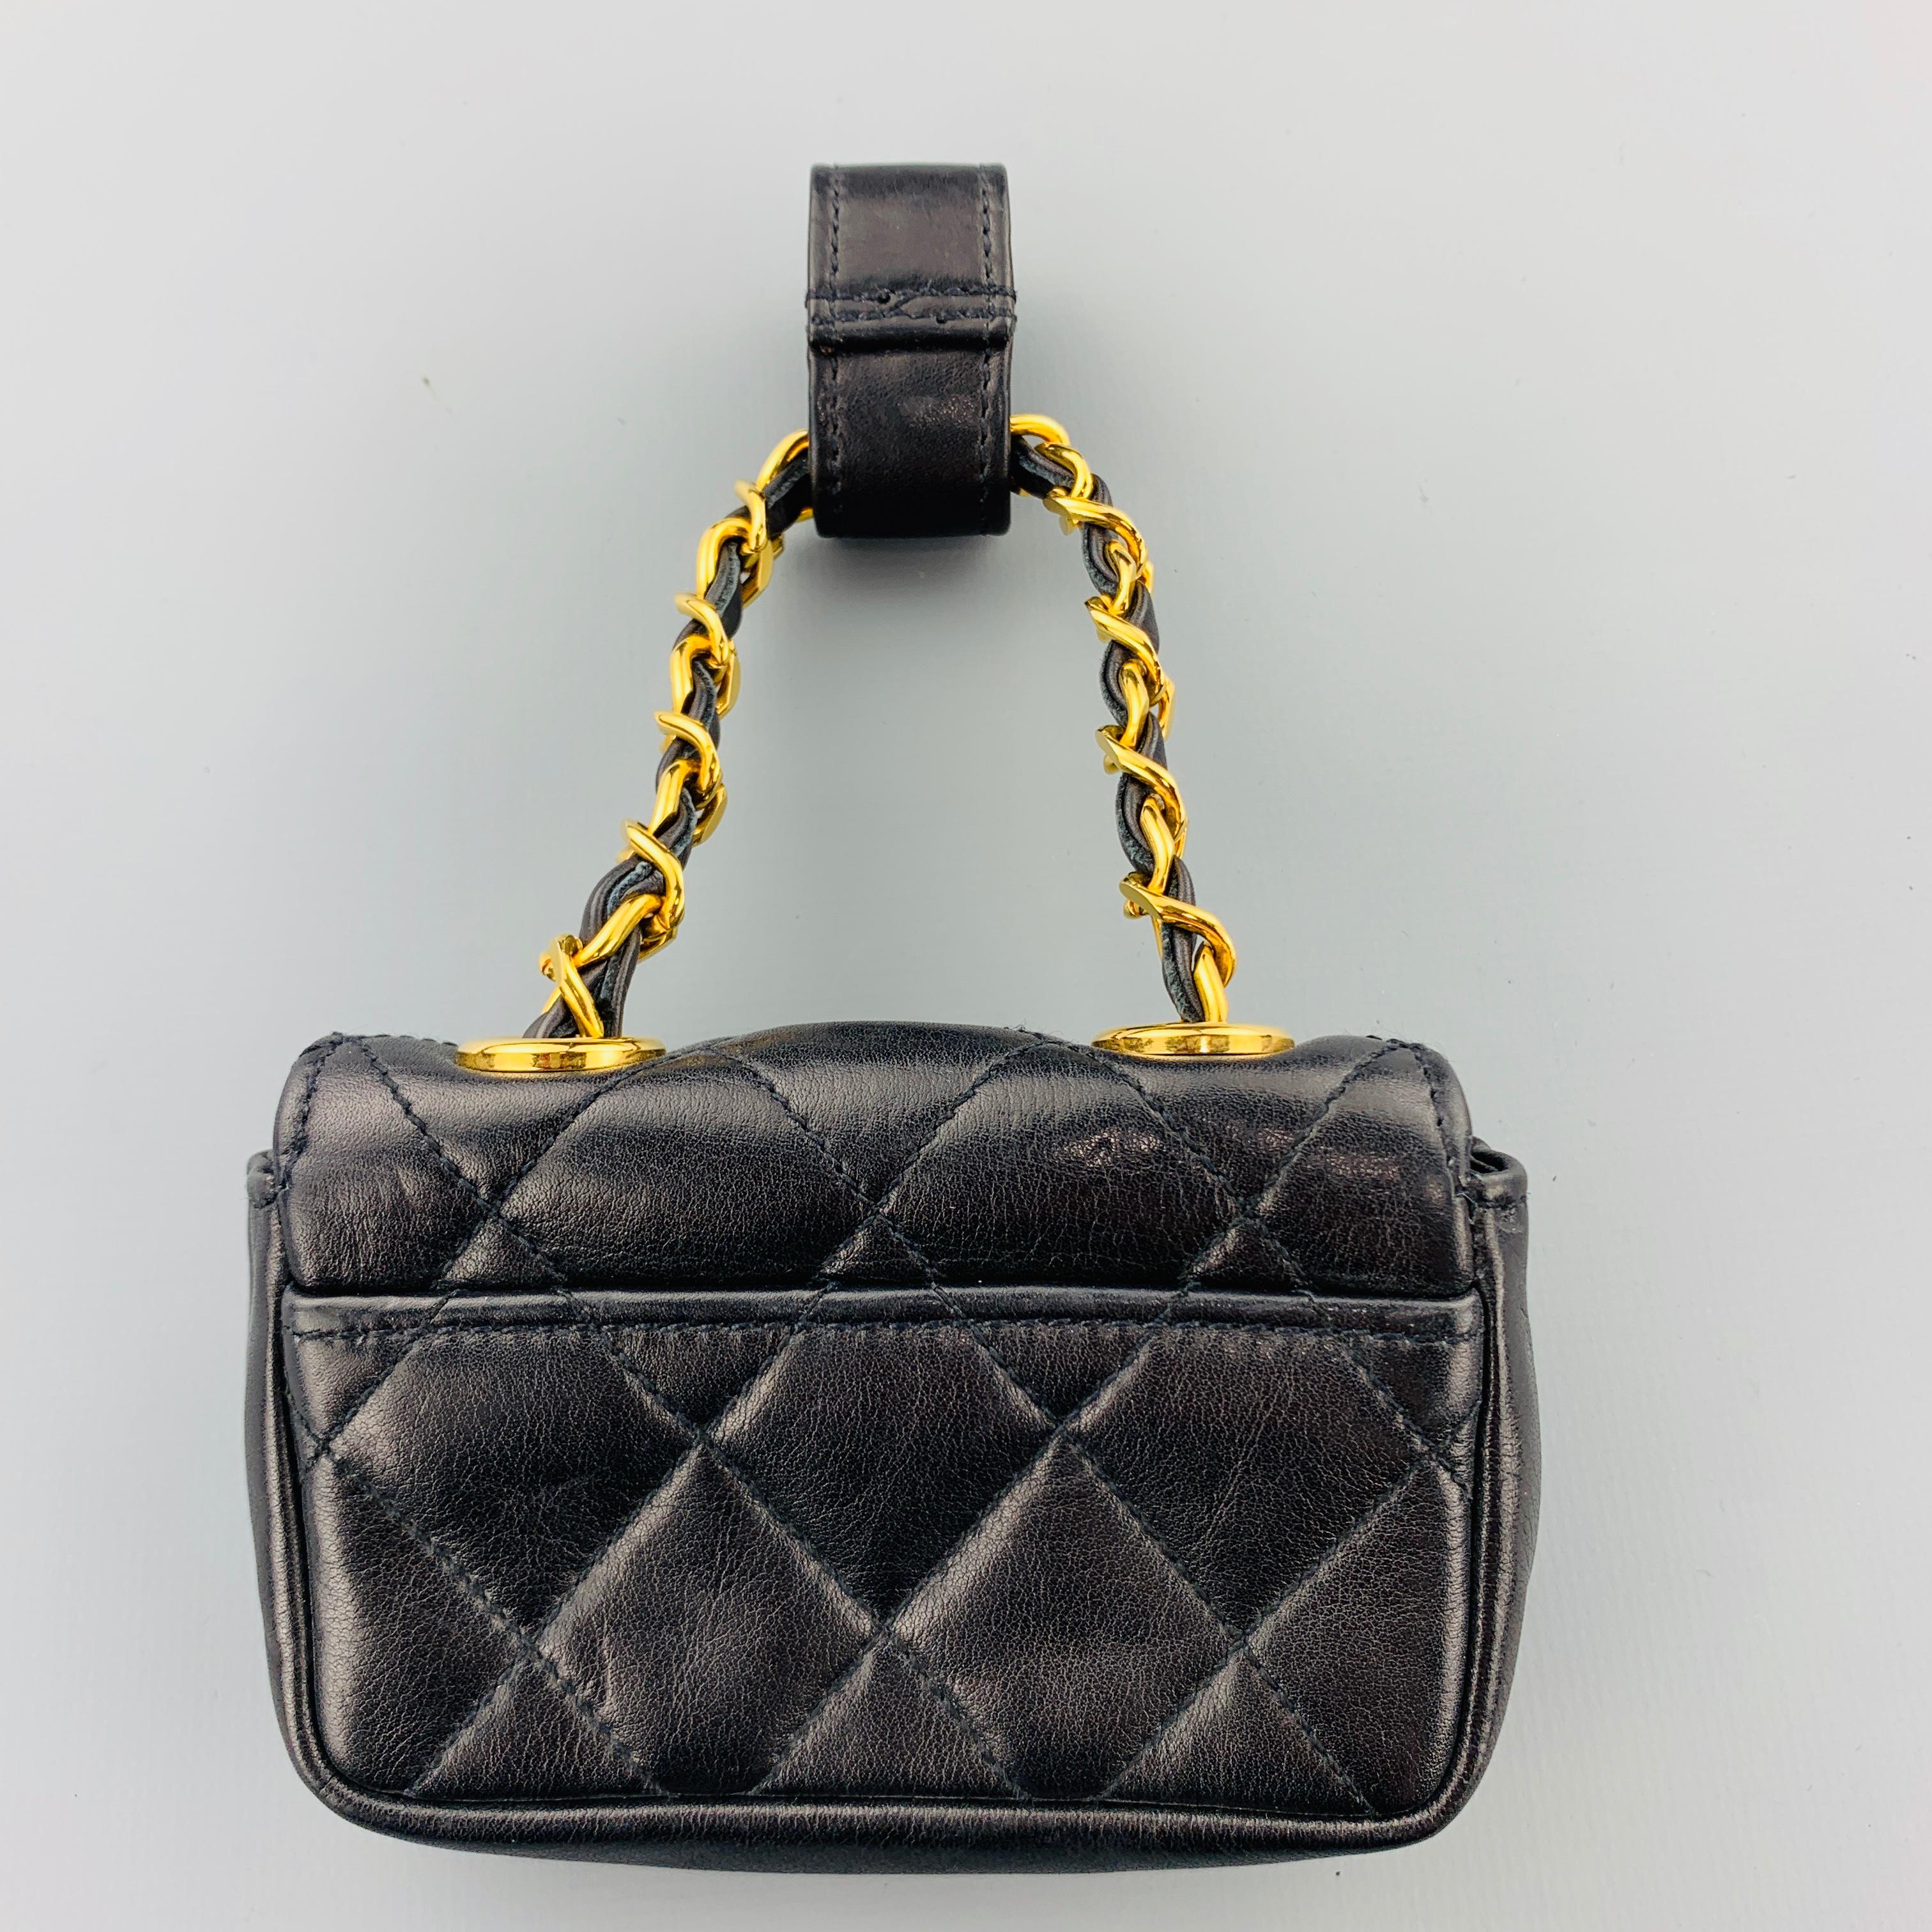 CHANEL Vintage Black Quilted Leather Mini Charm Pouch Purse Bag 2